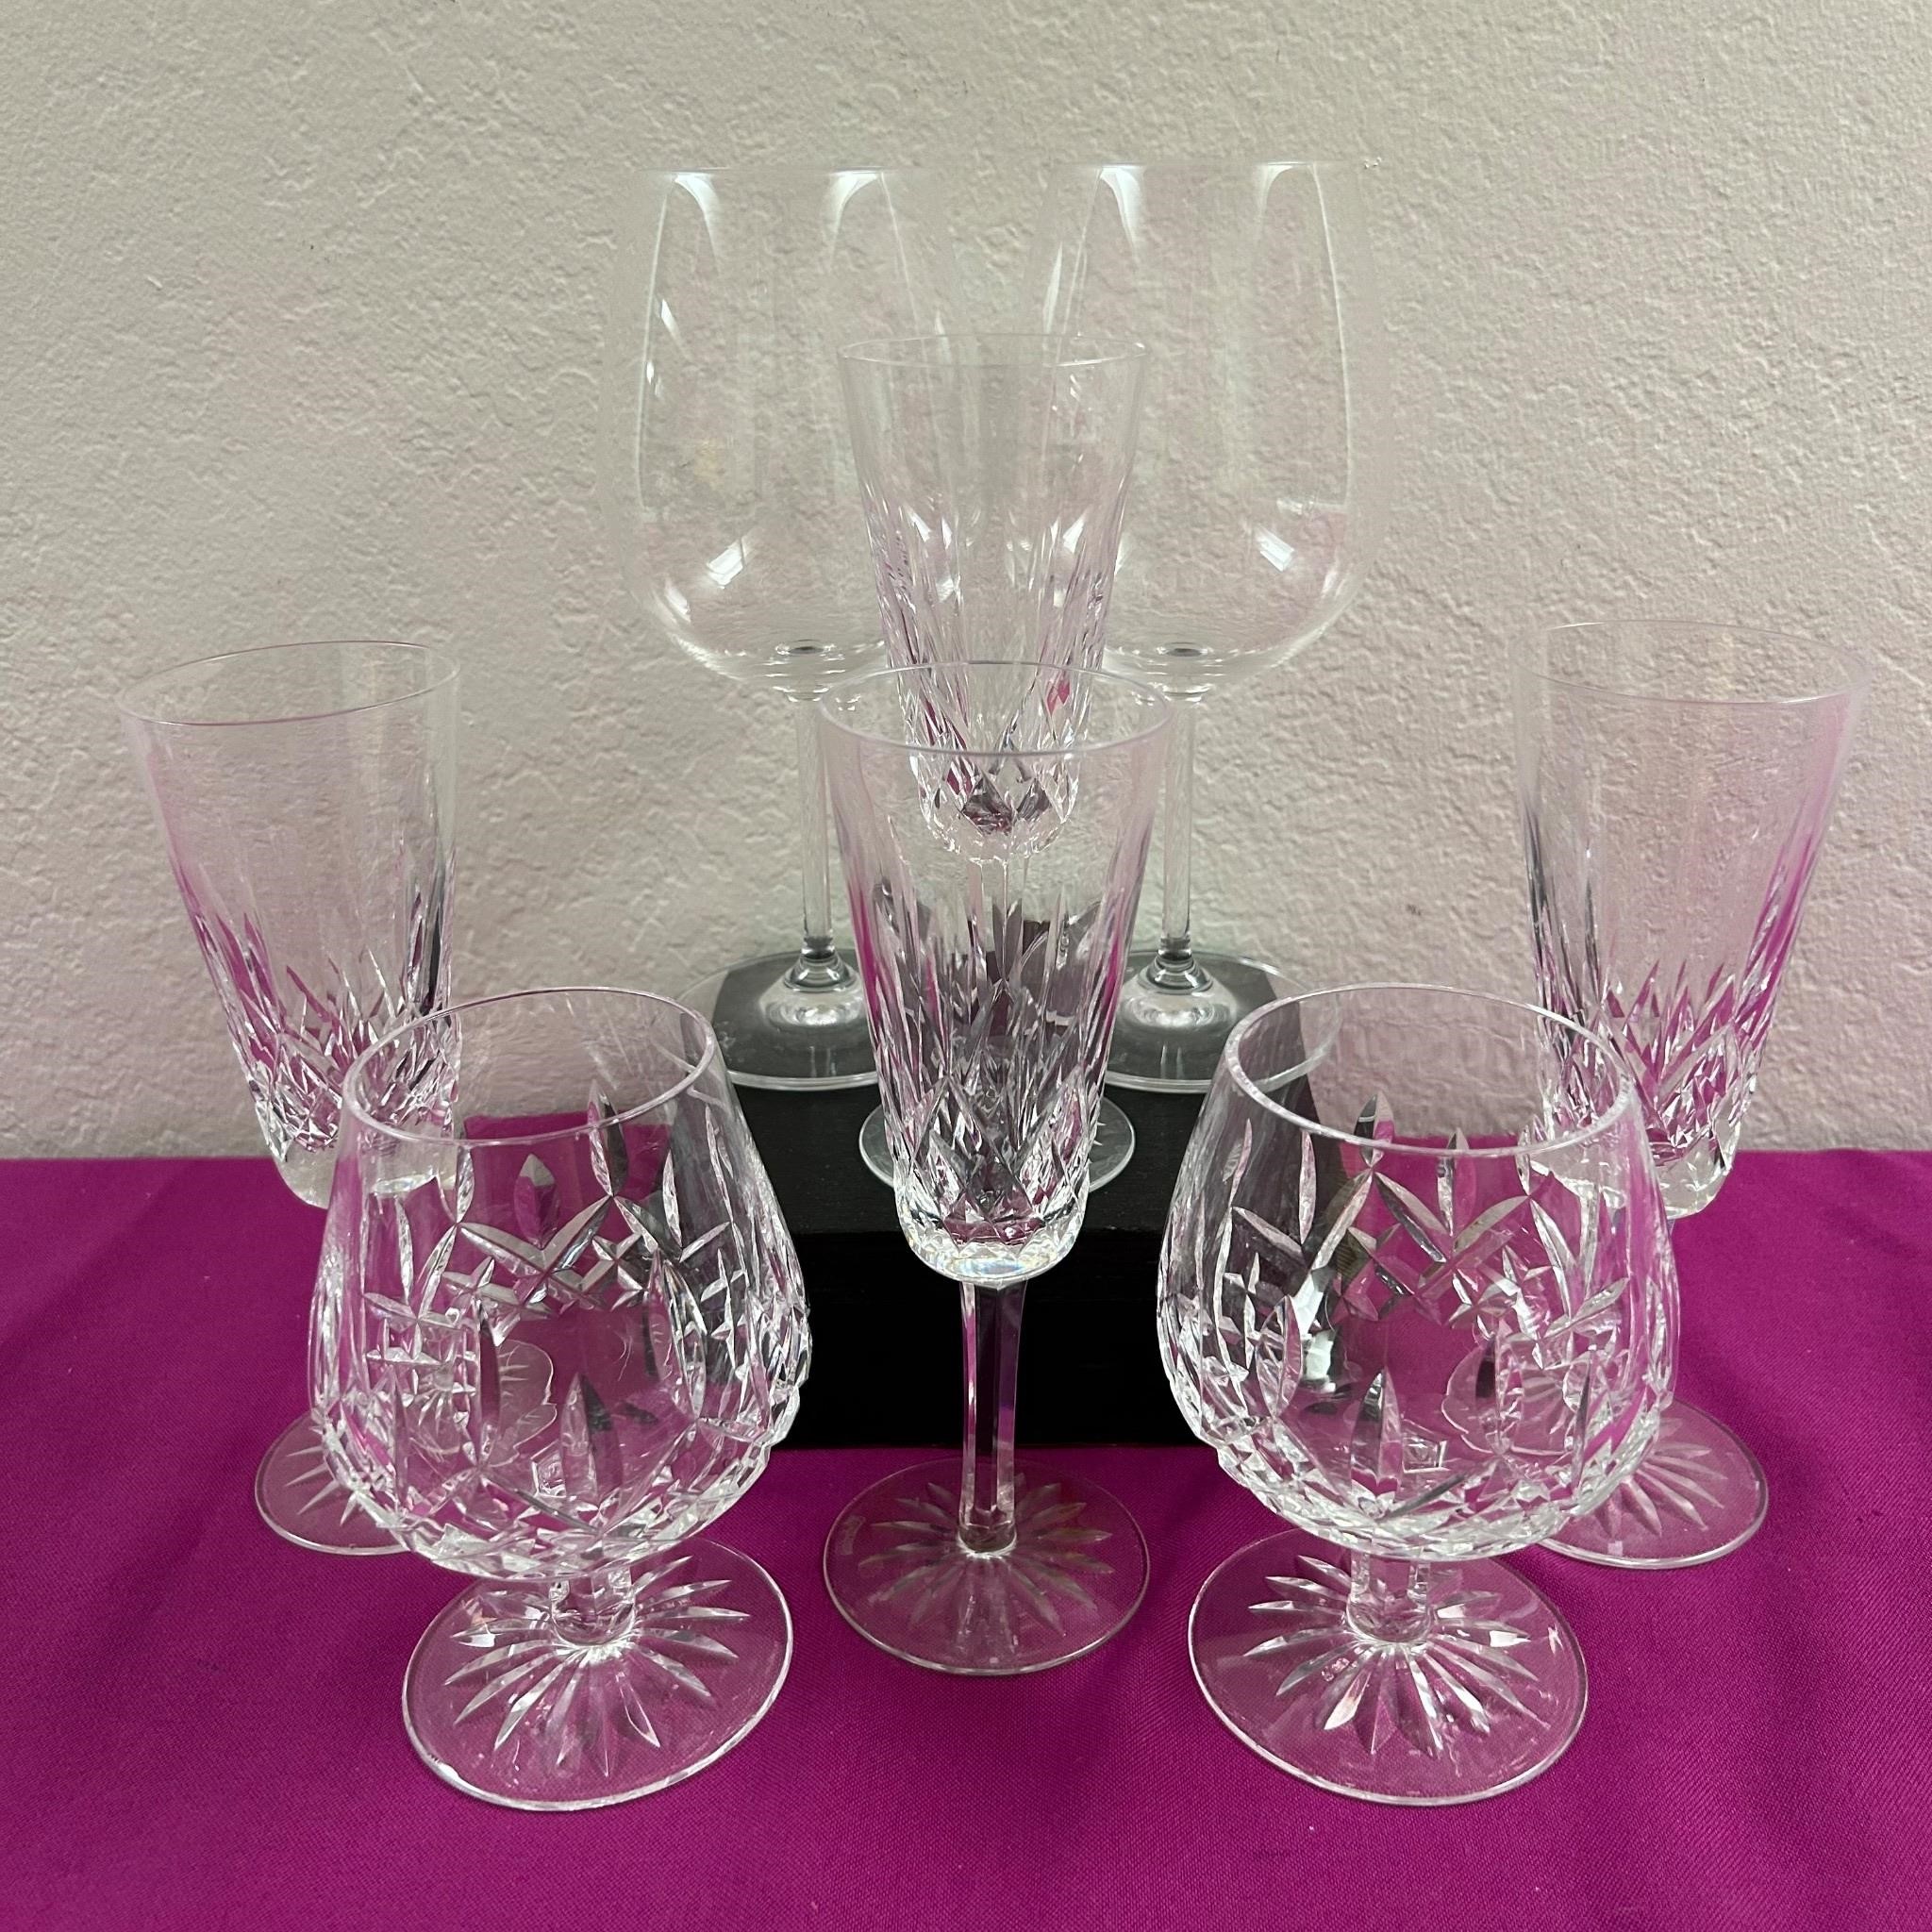 ‘Lismore’ & ‘Marquise’ by Waterford Wine Glasses